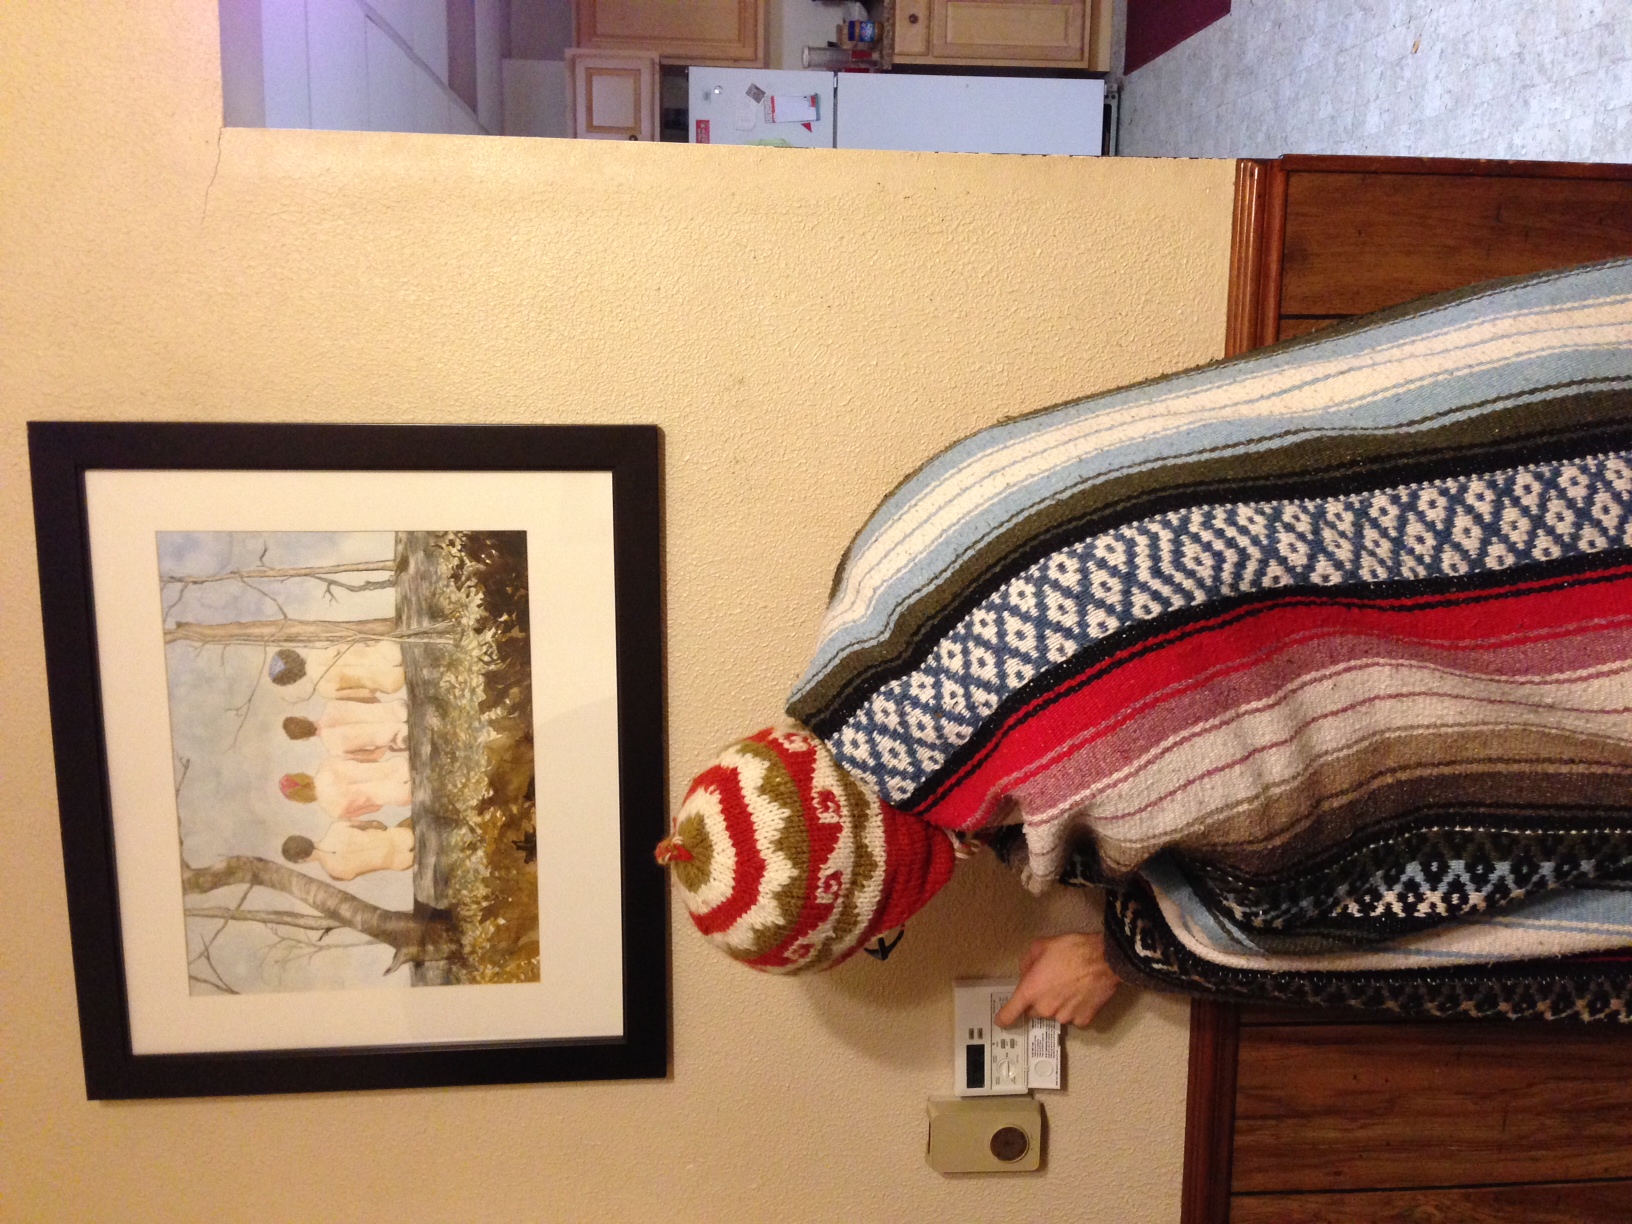 Josh Yoder adjusts the Prude House thermostat while wearing a warm hat and blanket